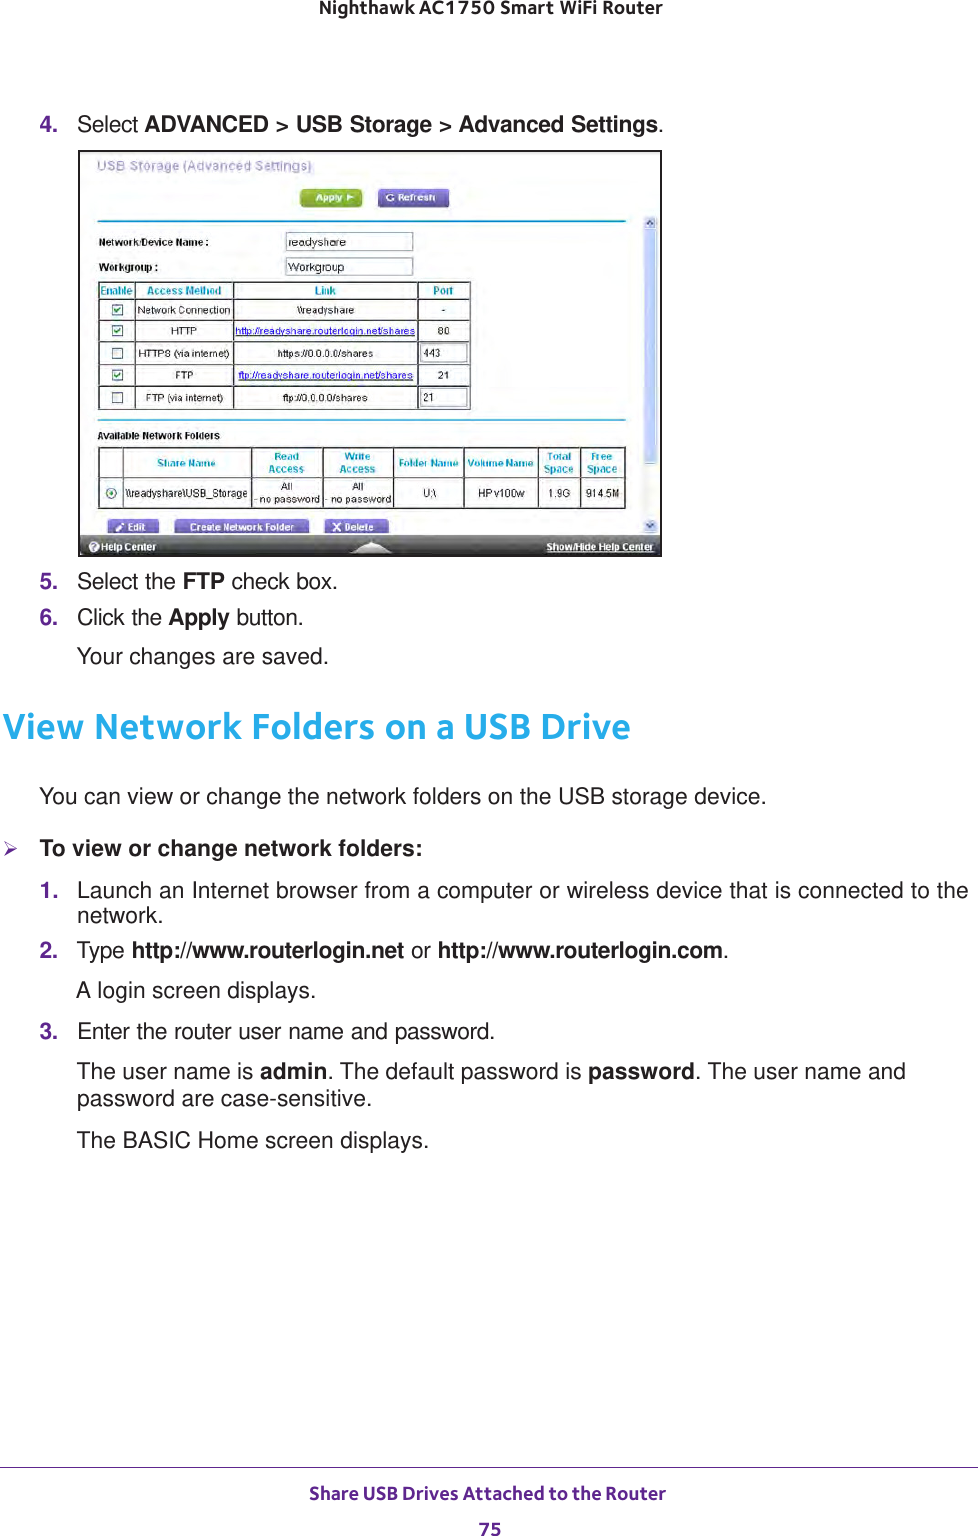 Share USB Drives Attached to the Router 75 Nighthawk AC1750 Smart WiFi Router4.  Select ADVANCED &gt; USB Storage &gt; Advanced Settings.5.  Select the FTP check box.6.  Click the Apply button.Your changes are saved.View Network Folders on a USB DriveYou can view or change the network folders on the USB storage device.To view or change network folders:1.  Launch an Internet browser from a computer or wireless device that is connected to the network.2.  Type http://www.routerlogin.net or http://www.routerlogin.com.A login screen displays.3.  Enter the router user name and password.The user name is admin. The default password is password. The user name and password are case-sensitive.The BASIC Home screen displays.